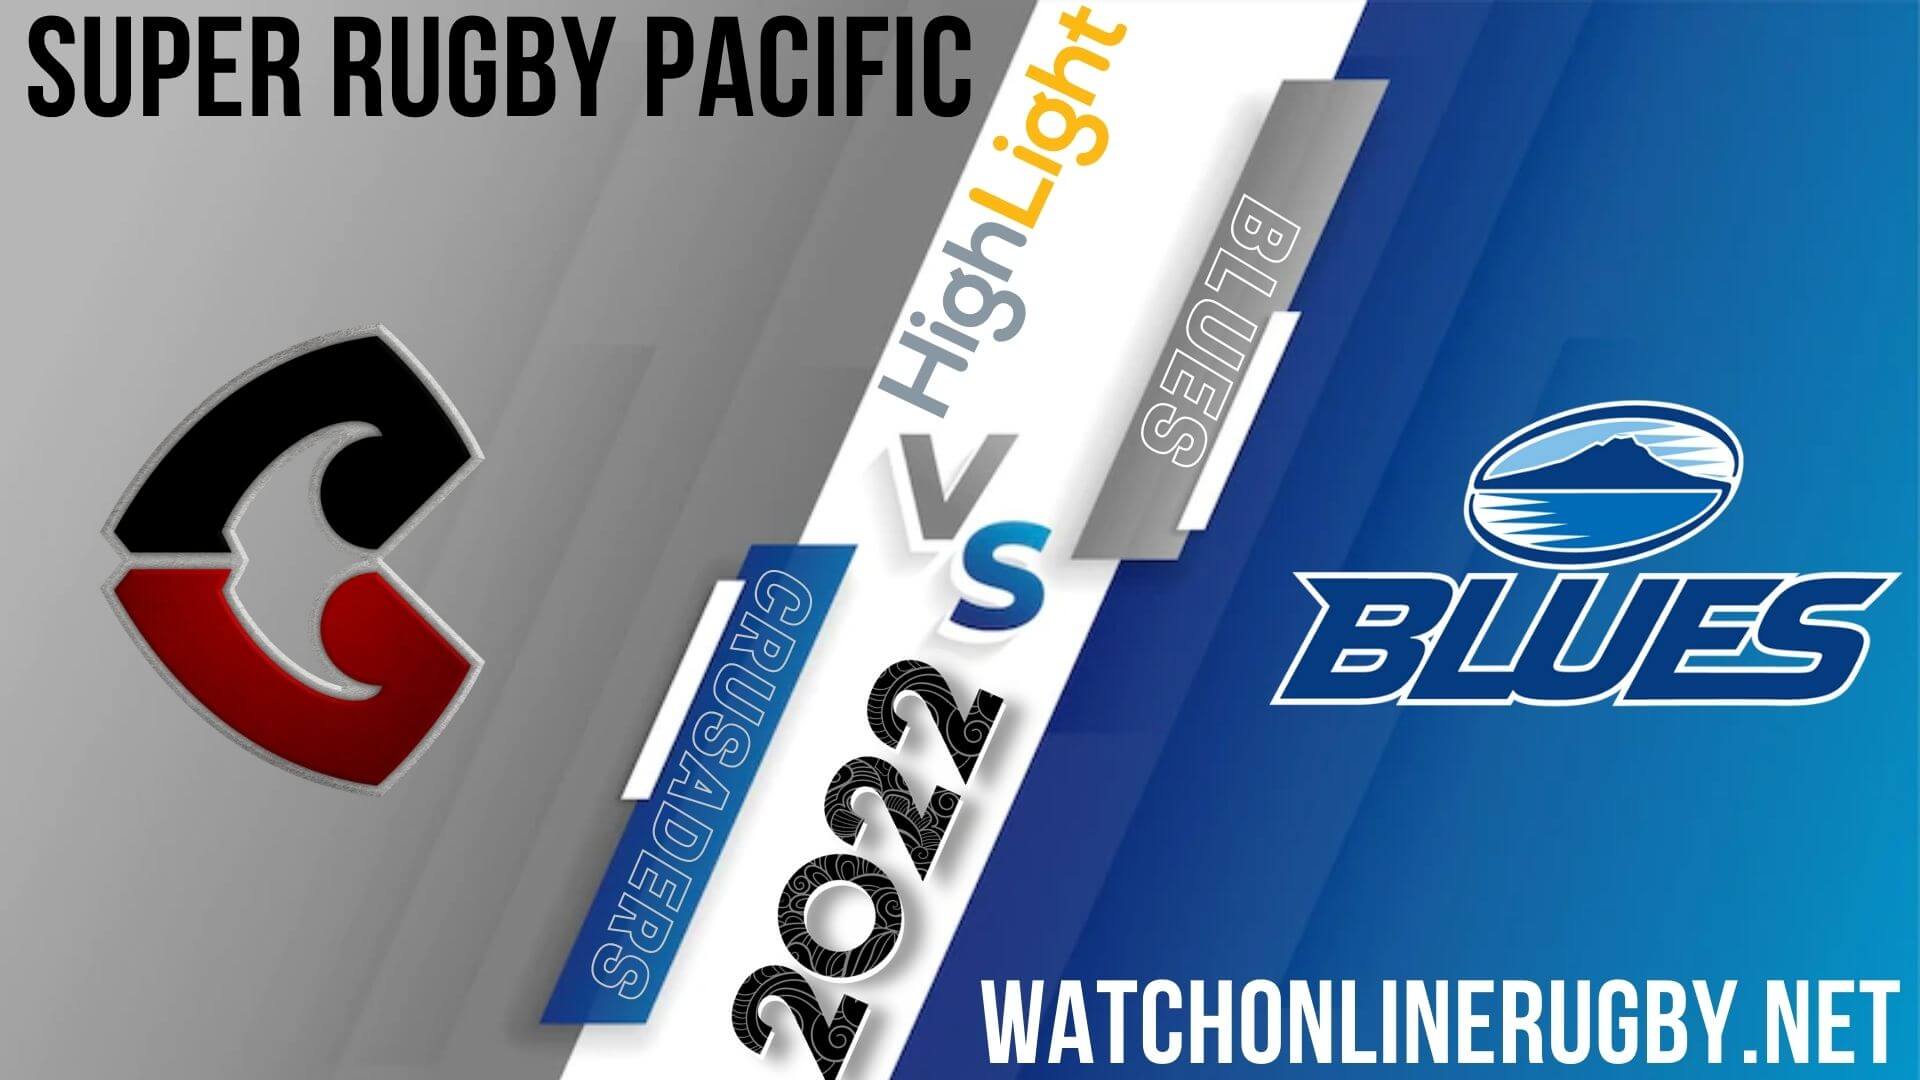 Crusaders Vs Blues Super Rugby Pacific 2022 RD 9